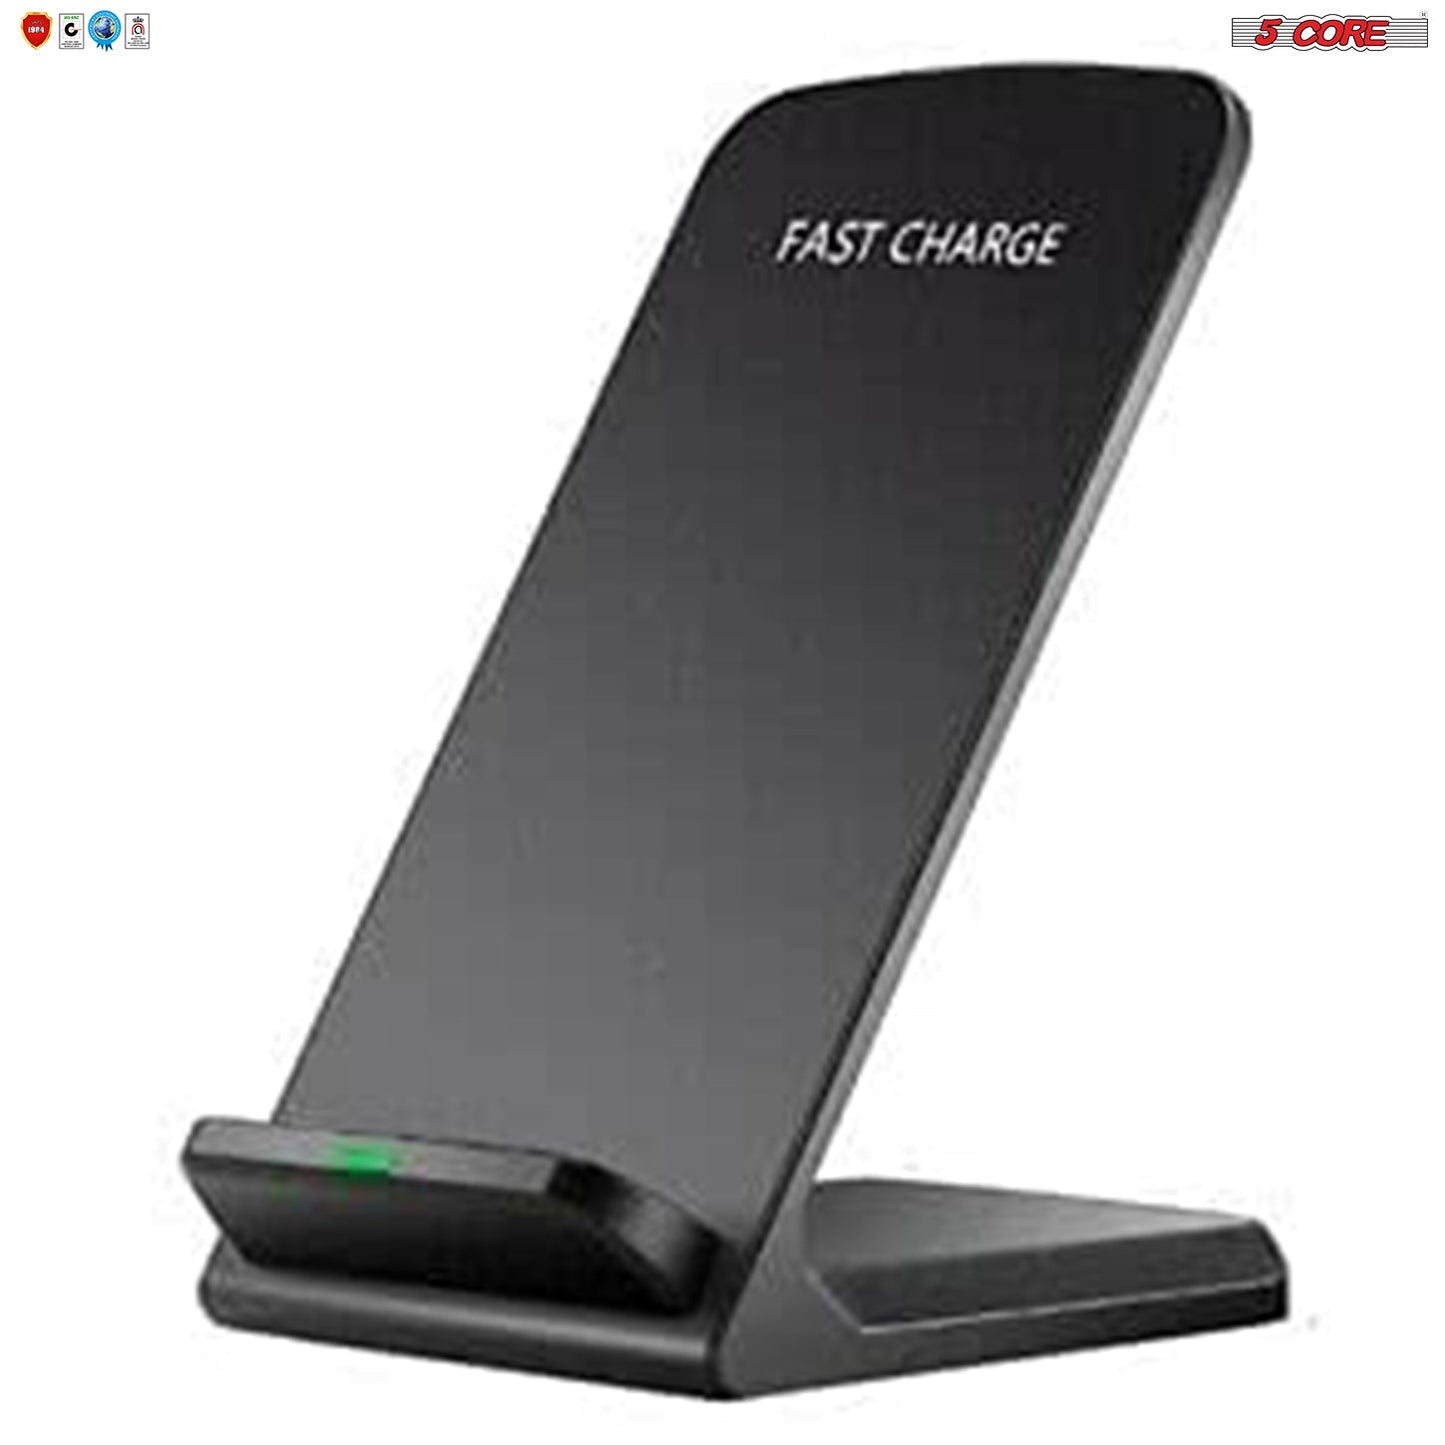  Wireless Charger Charging Pad Fast Phone Charging Stand Dock 10W Black